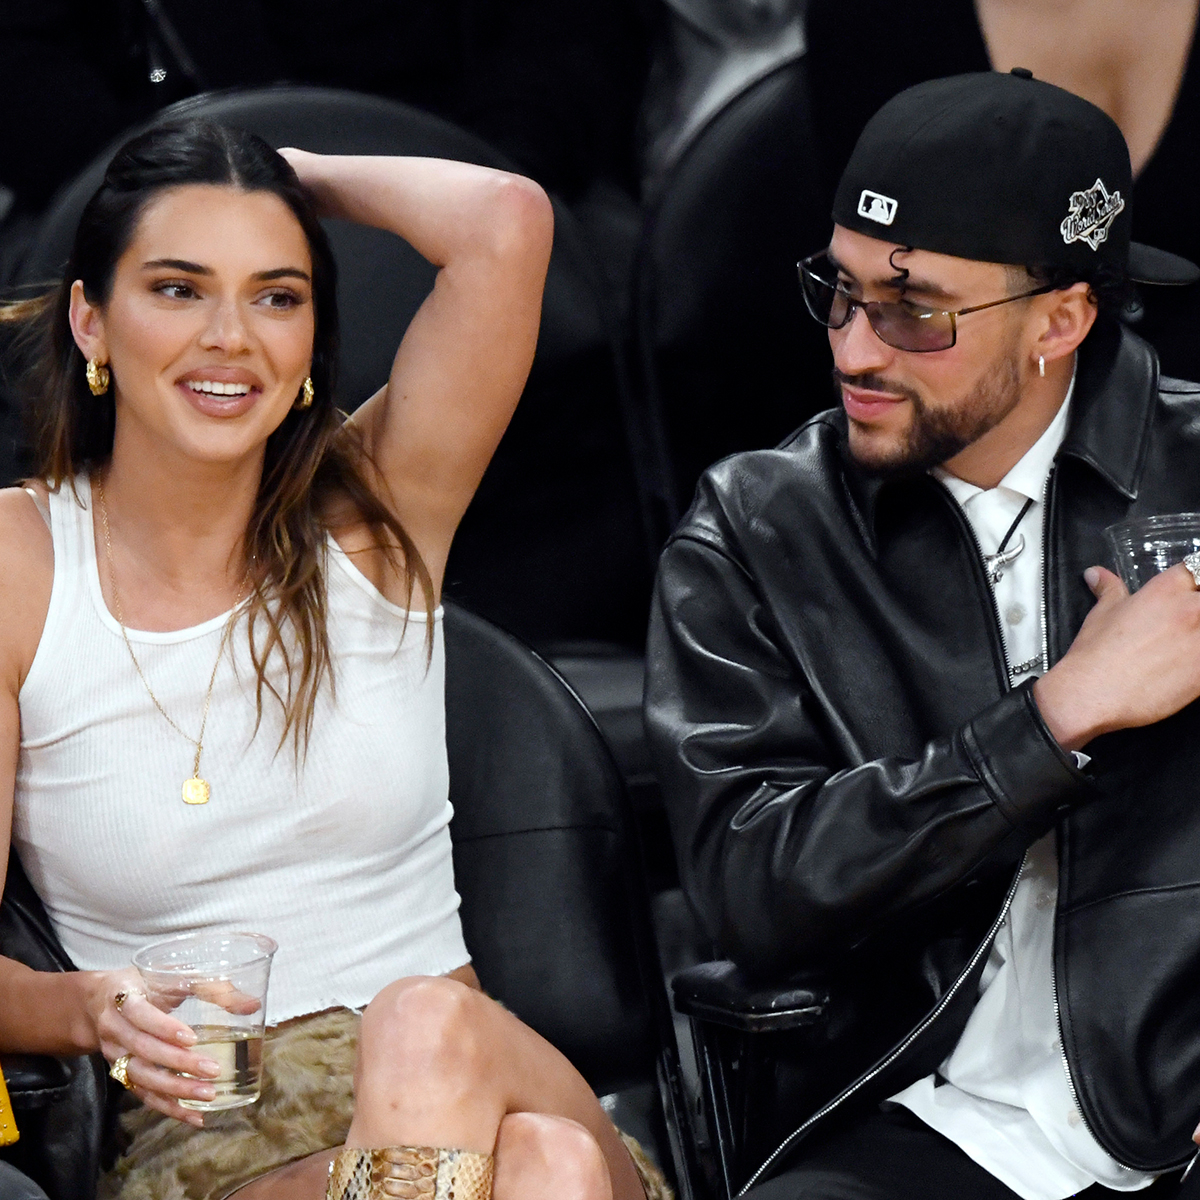 Kendall Jenner and Bad Bunny go official with their romance in